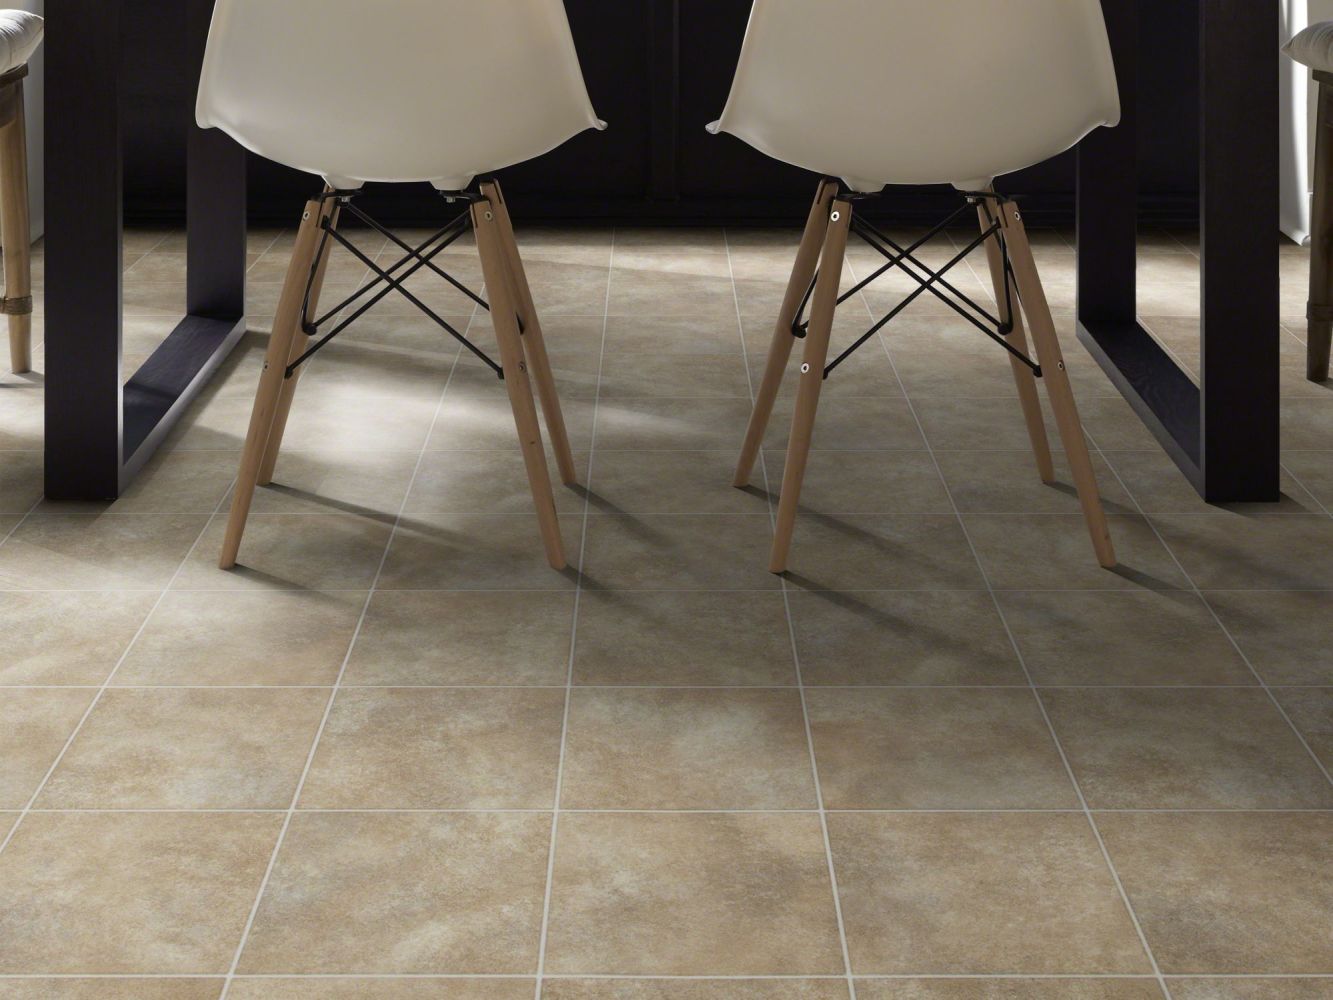 Shaw Floors Resilient Property Solutions Pro 12 Classics Tan 00150_VG054